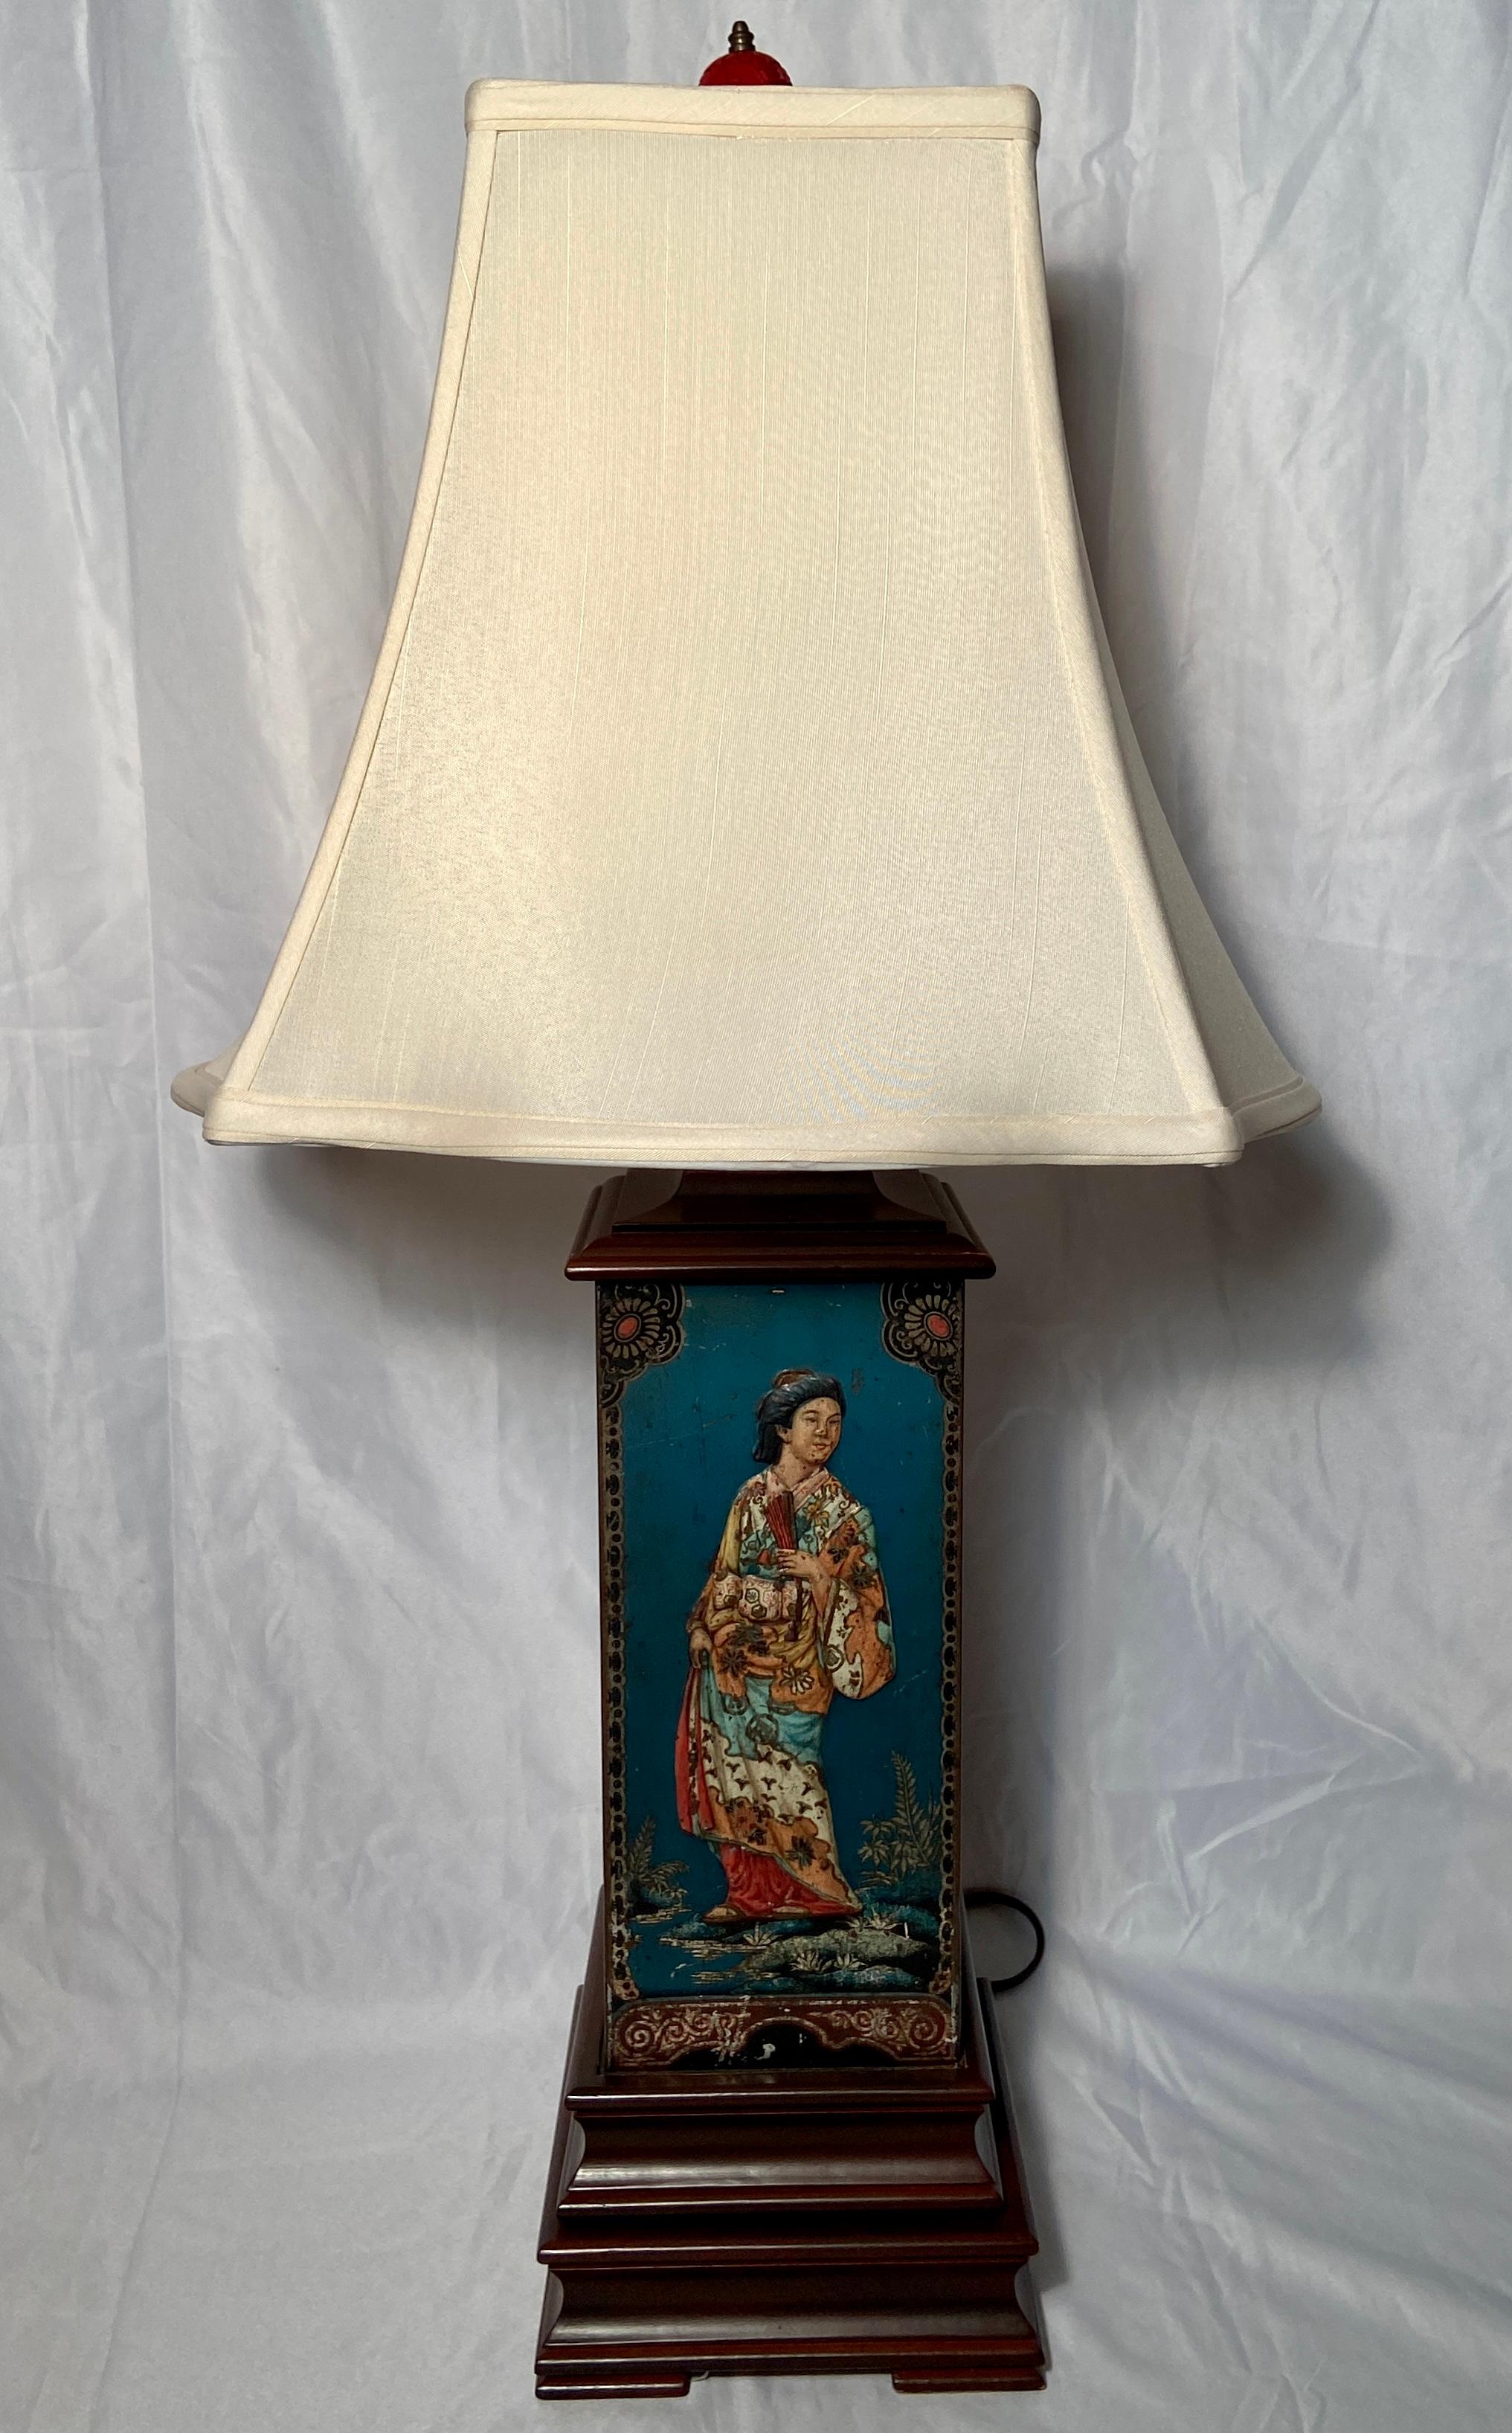 Pair antique carved wood and tole lamps with hand-painted Chinese scenes, circa 1890-1910.